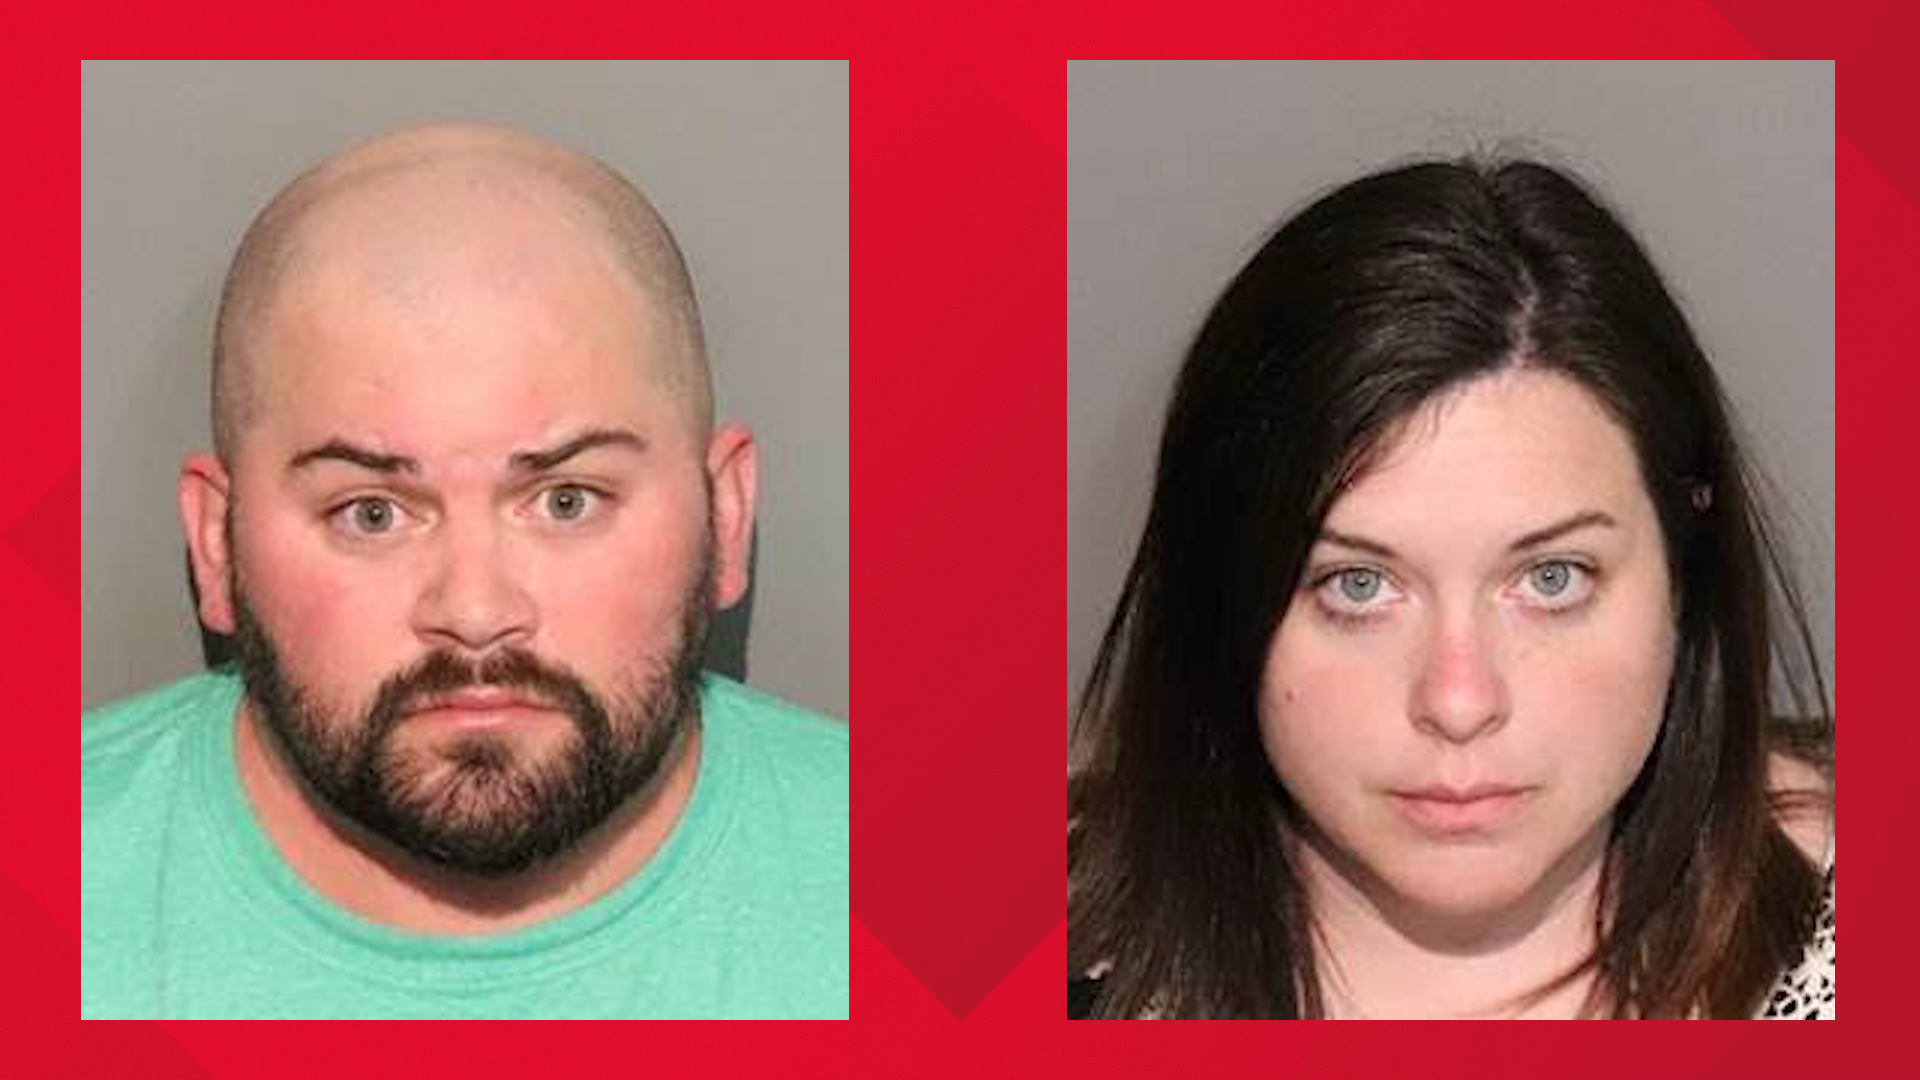 The father, Jordan Piper, 36, and step-mother, Lindsey Piper, 38, now face murder charges, according to the El Dorado County District Attorney's Office.